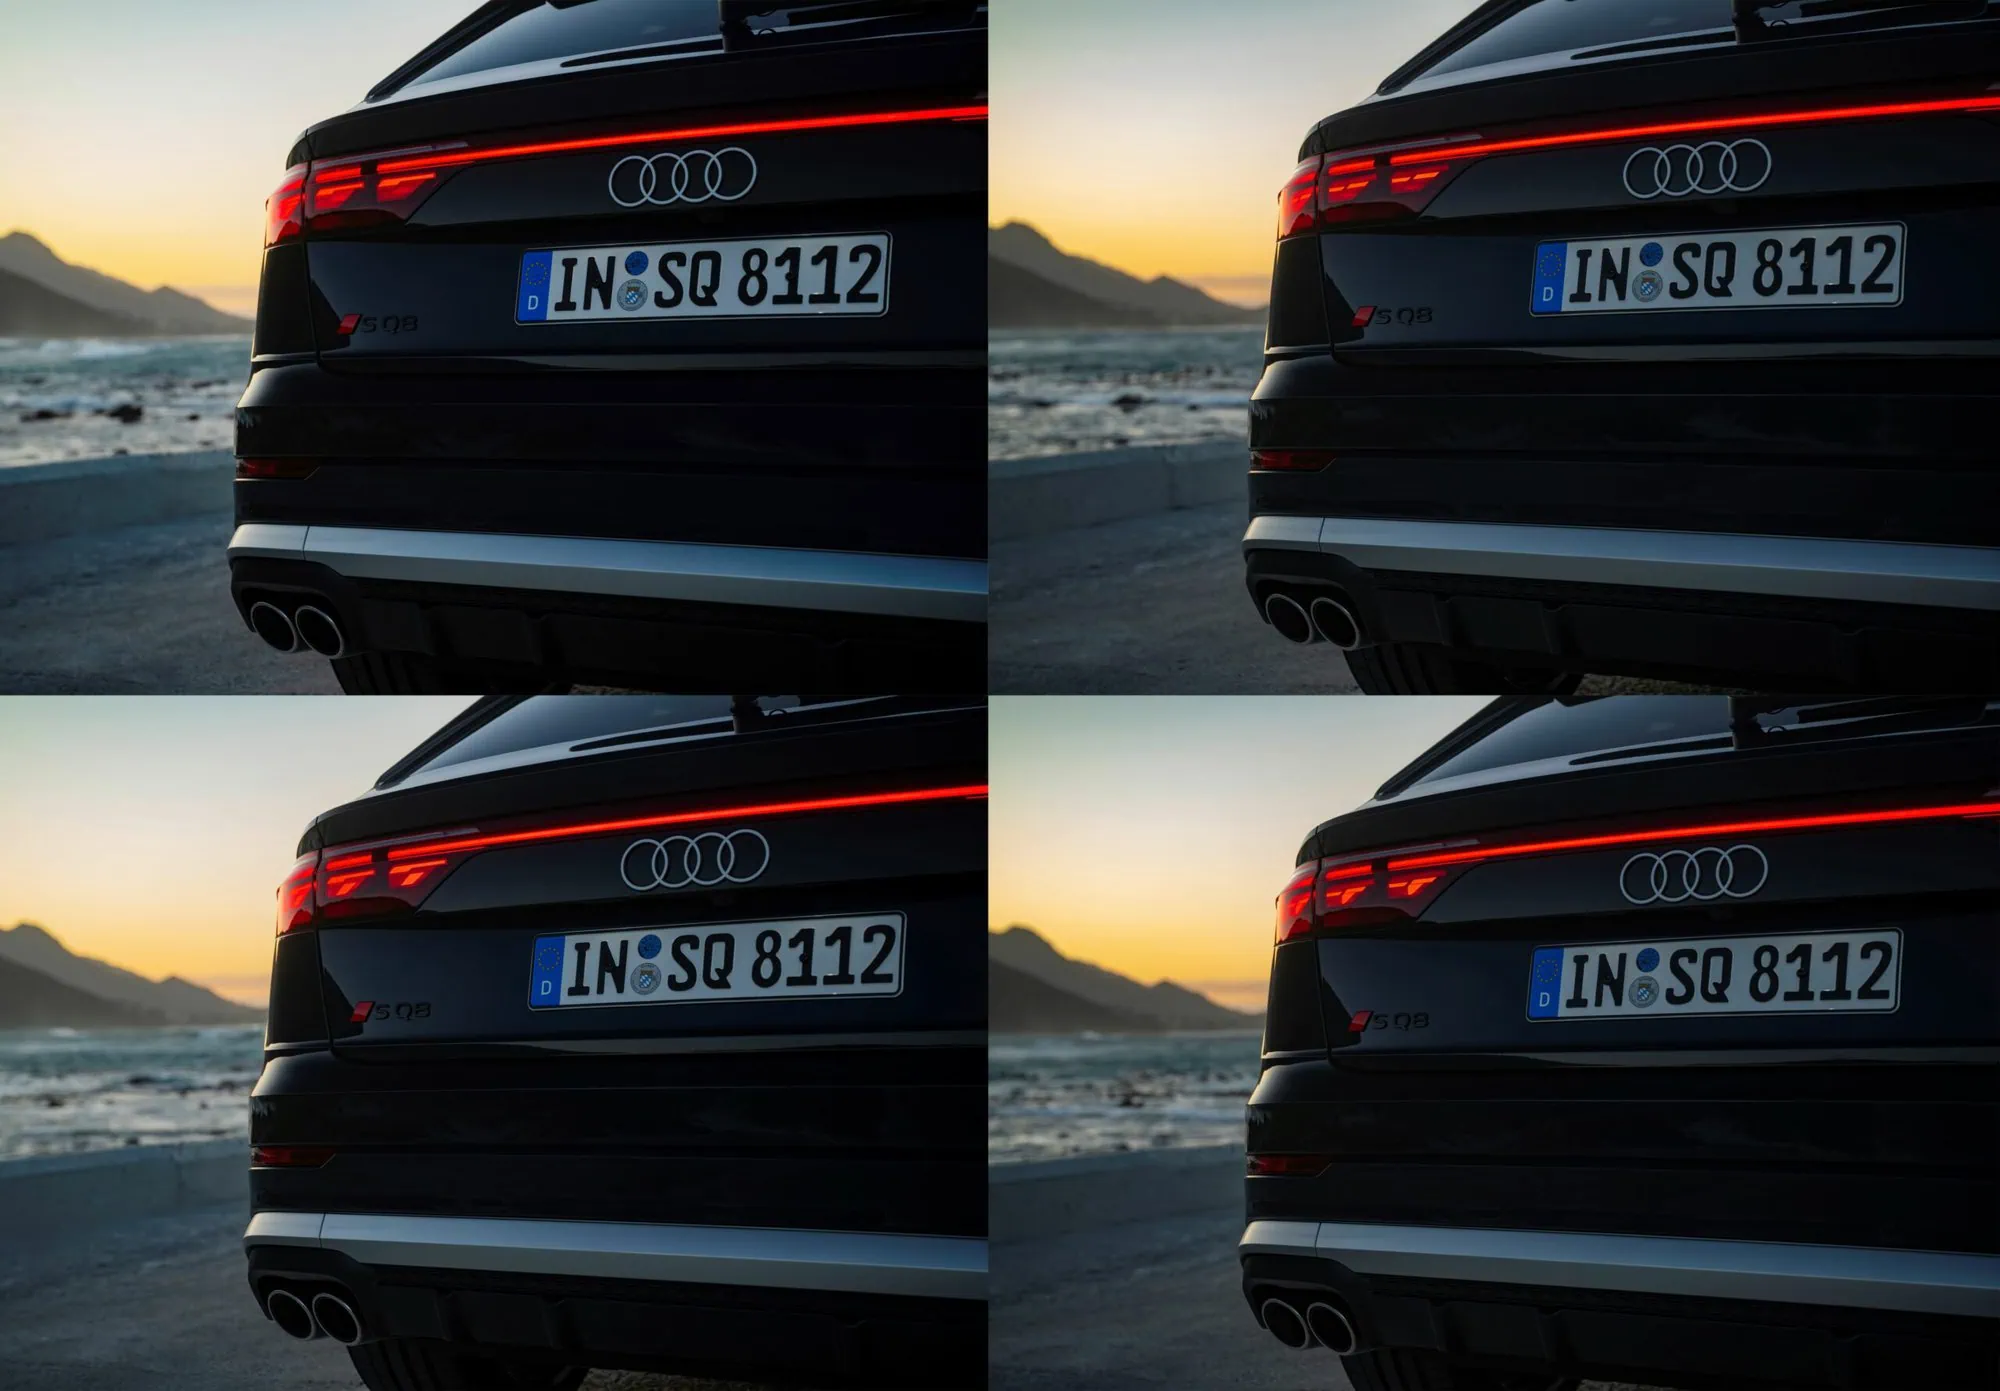 Audi Q8 car with digital Atala OLED rear lighting. Parked car at dusk, with clouds in the background.